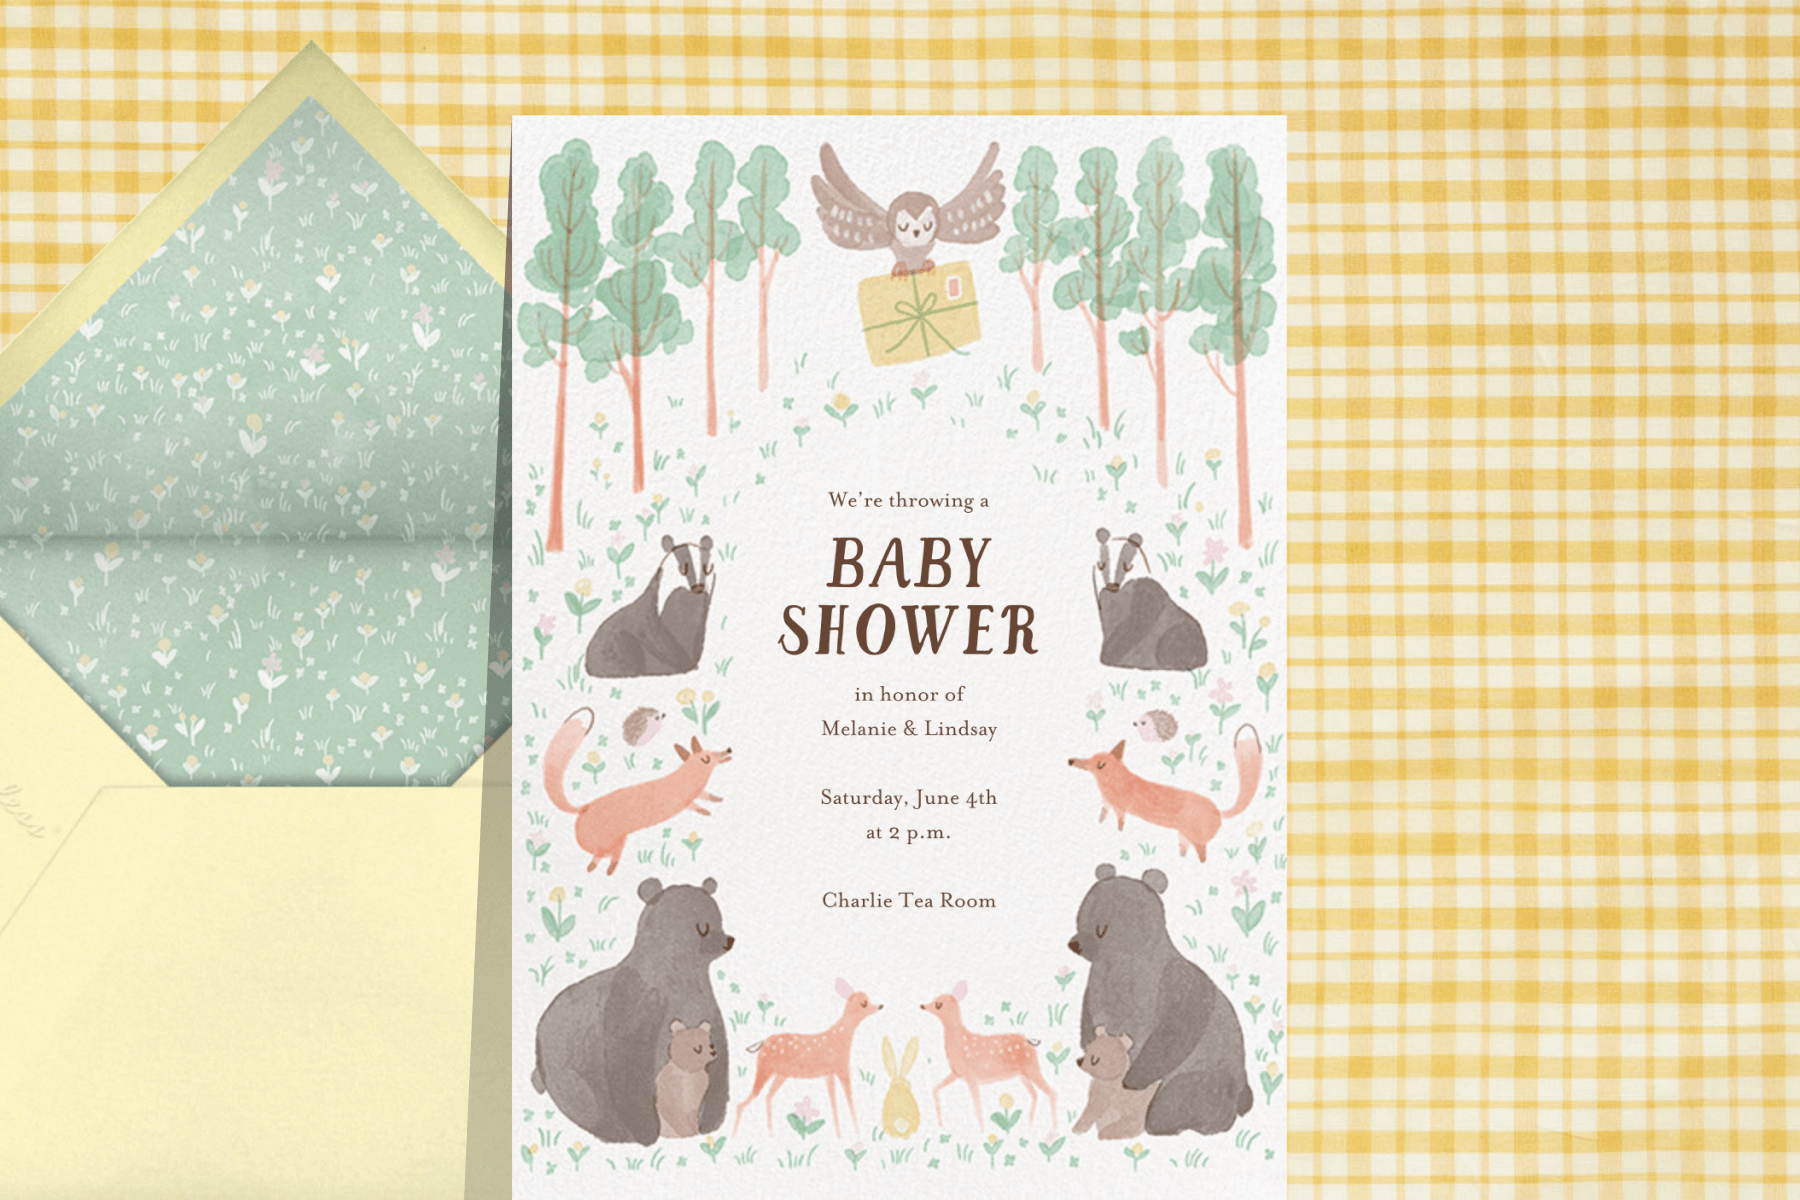 A baby shower card featuring woodland creatures like foxes, badgers and bears. An owl carries an invitation.